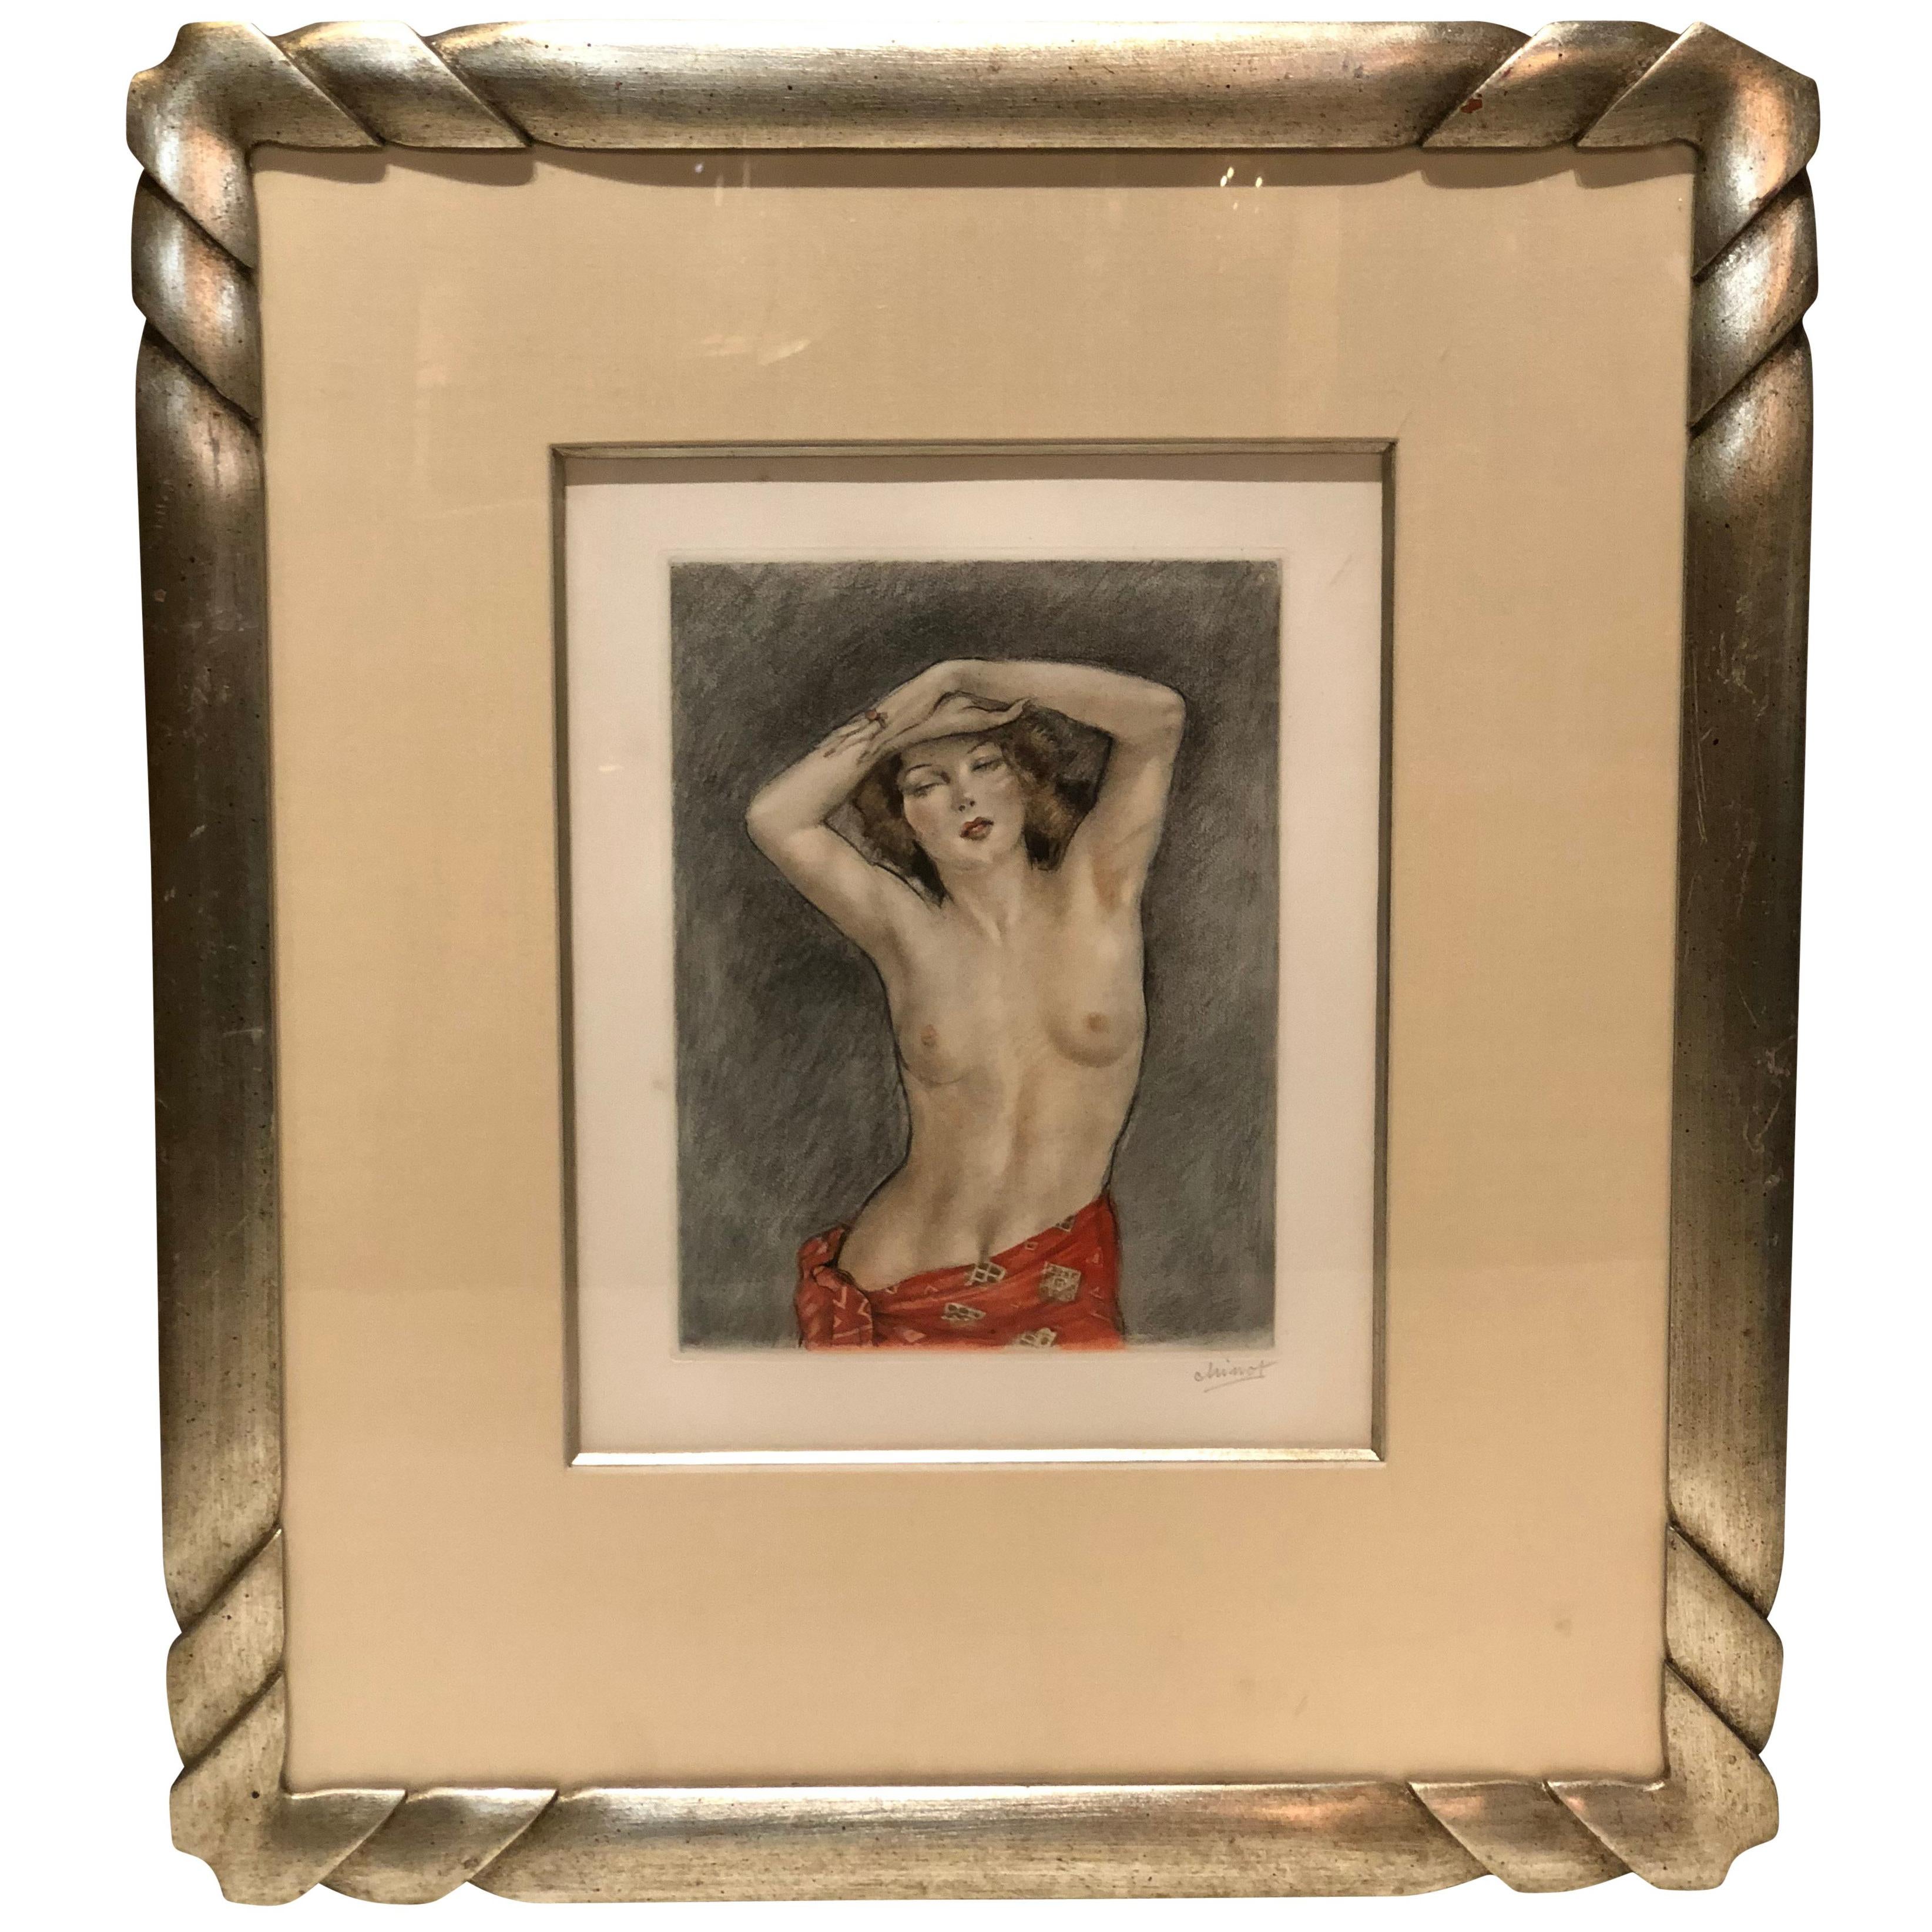 Color Etching Nude Titled "Phoebe", circa 1928 Signed in Pencil